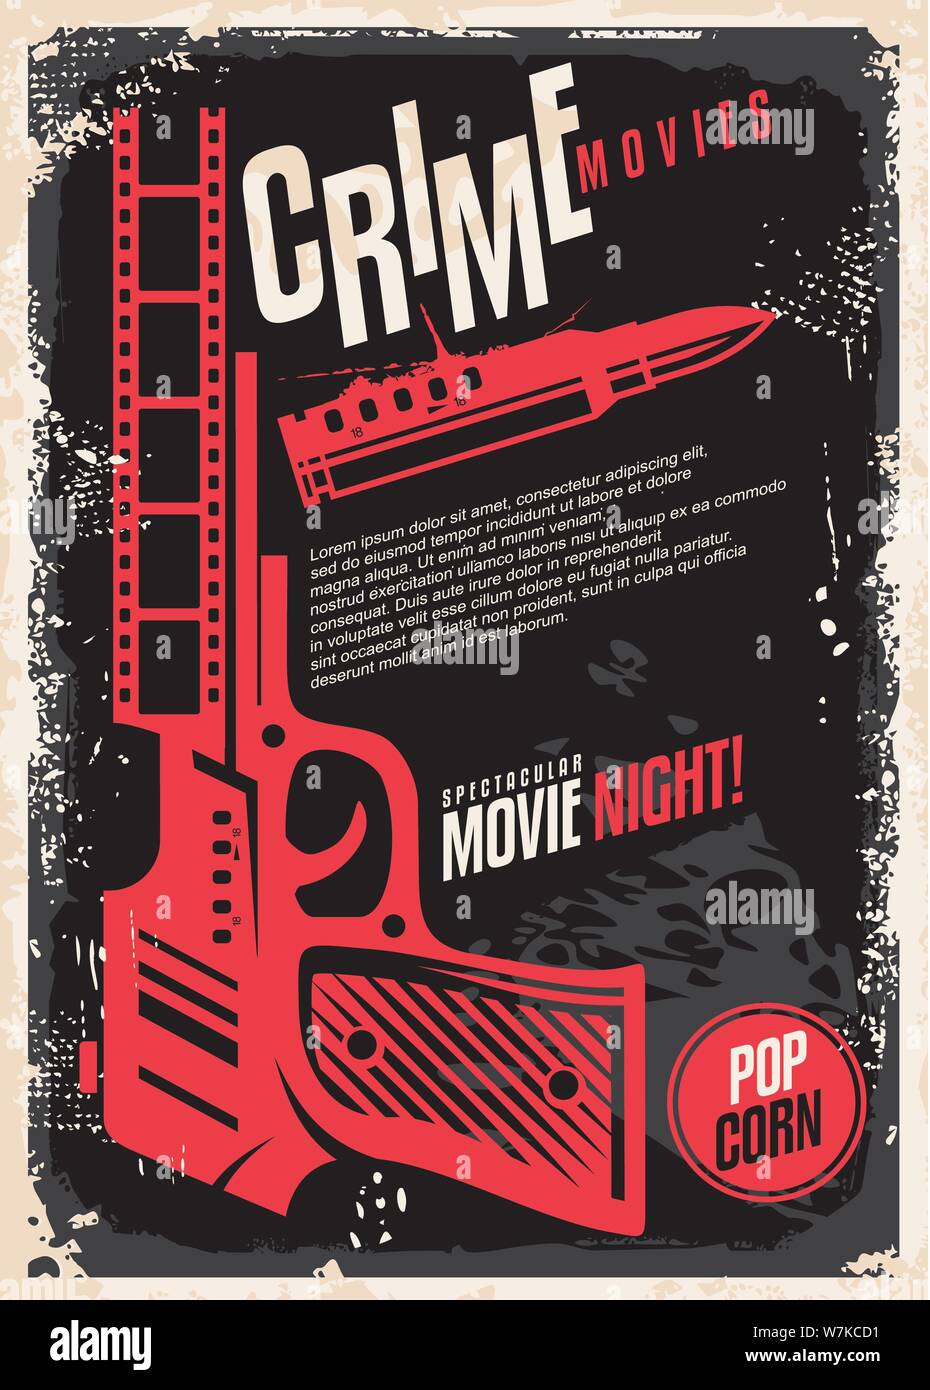 Crime movies spectacular movie night retro poster design. Cinema flyer with hand gun and bullet on dark textured background. Stock Vector